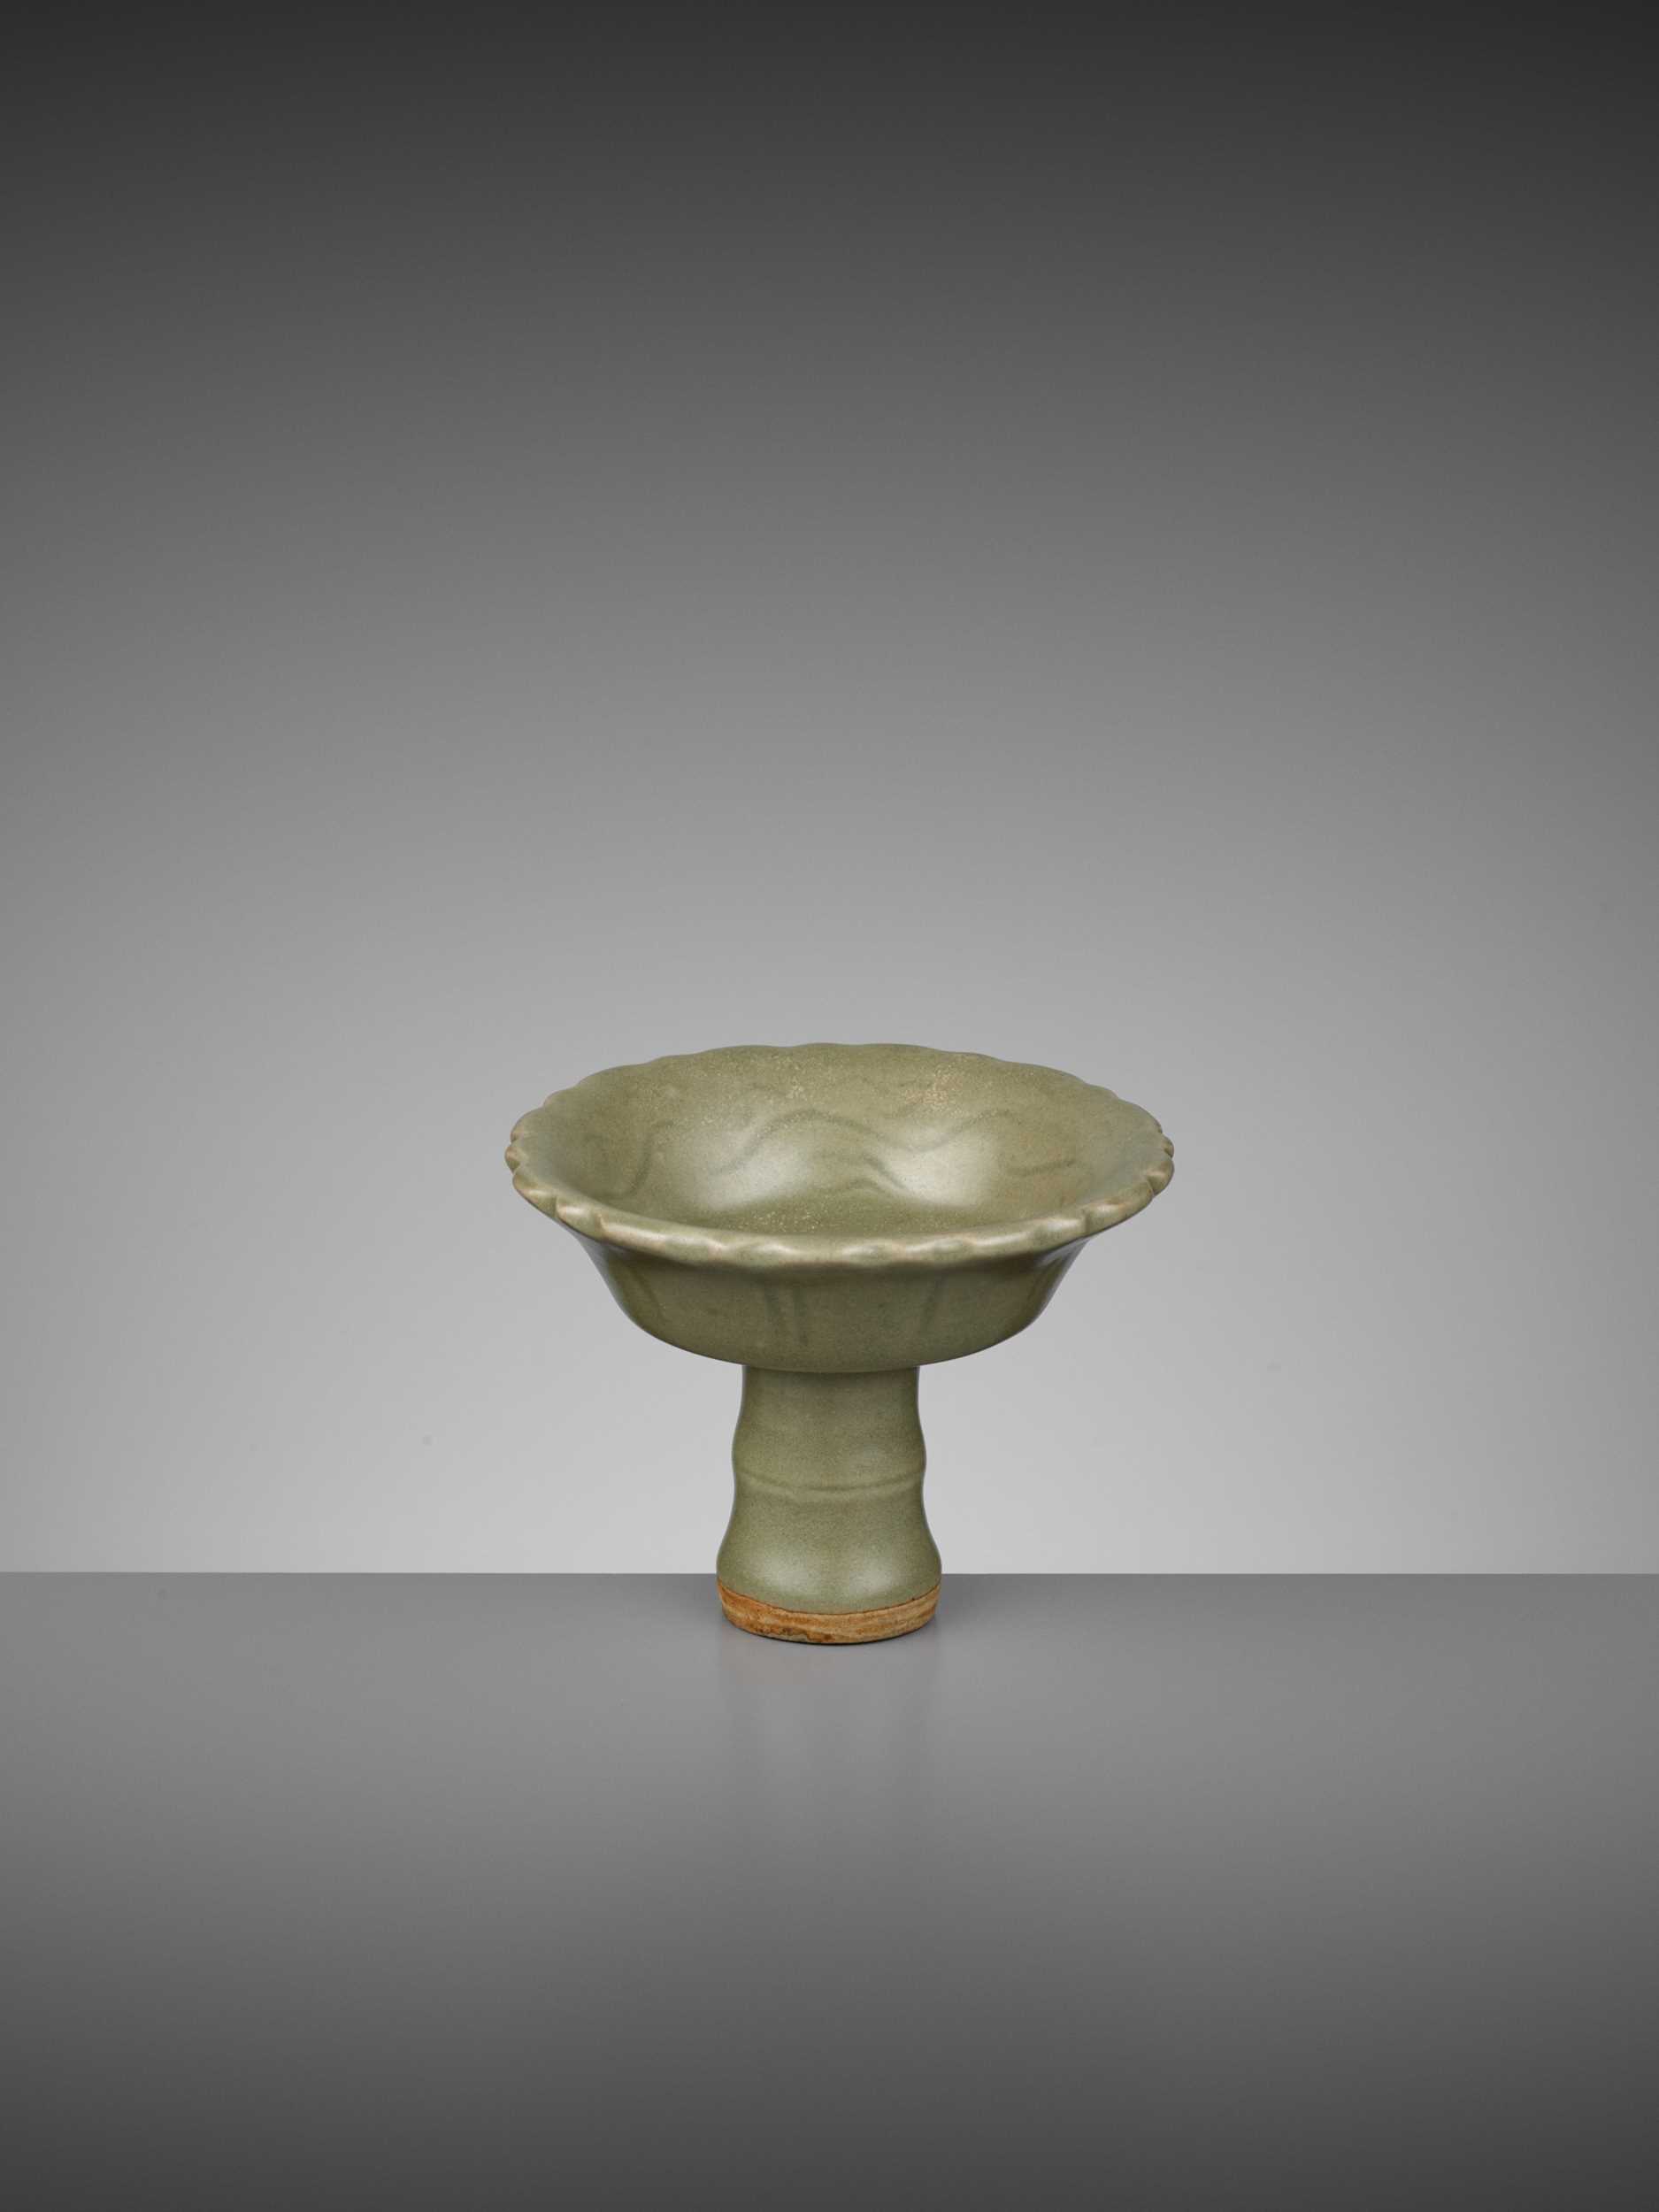 Lot 721 - A LONGQUAN CELADON ‘BAMBOO’ BARBED-RIM STEM CUP, YUAN TO EARLY MING